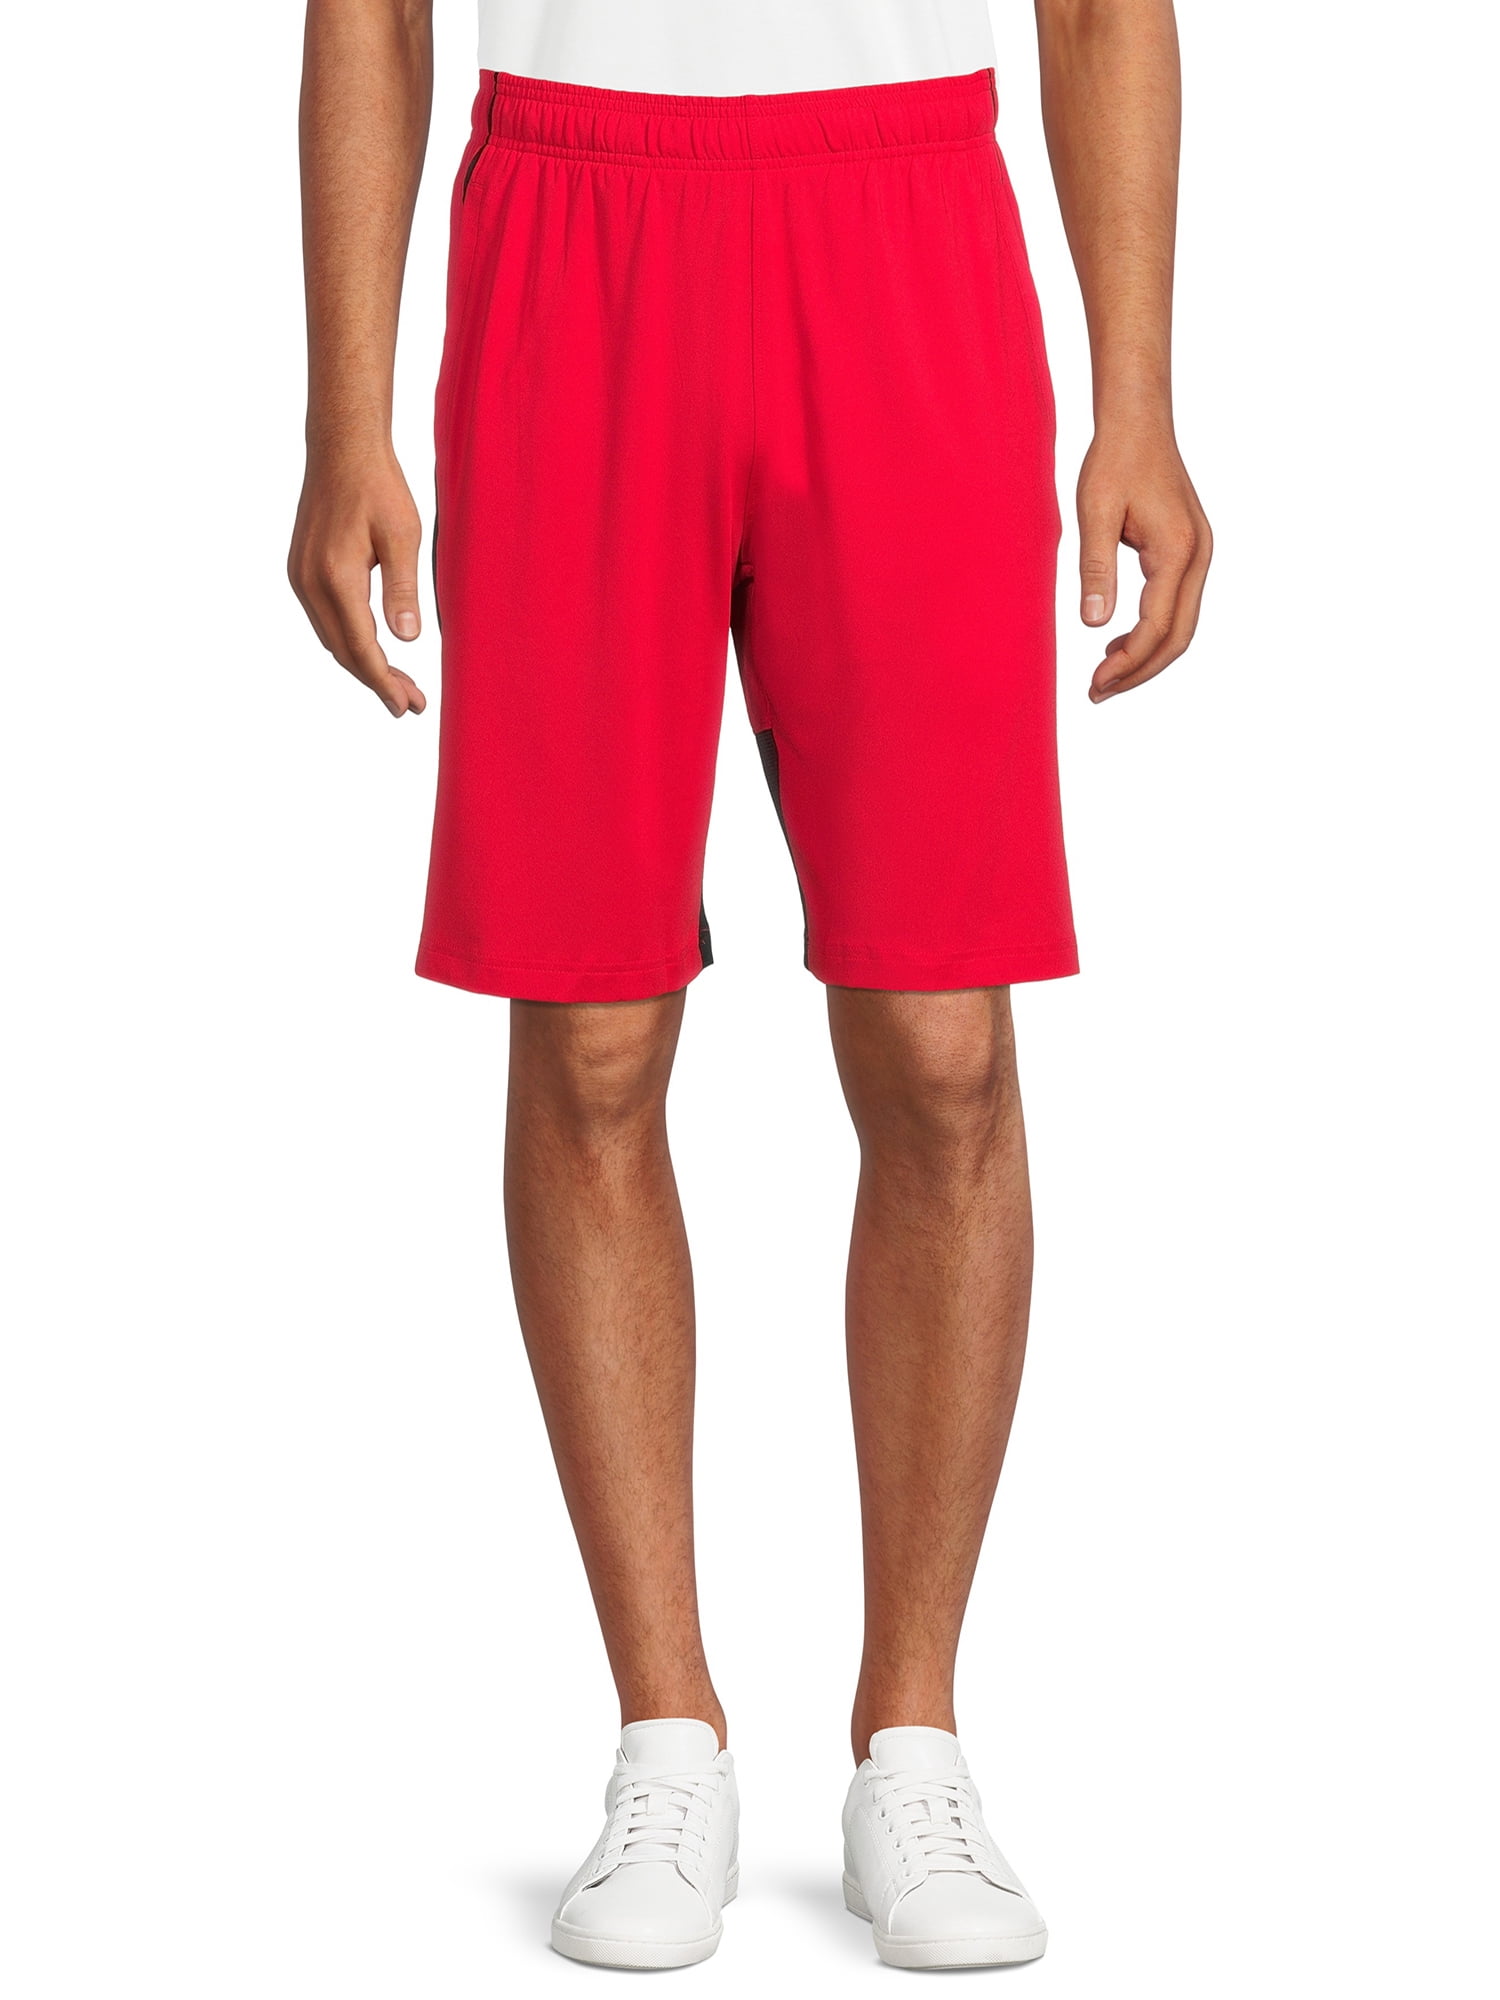 NEW Size Large Basketball Shorts Under Armour Mens 